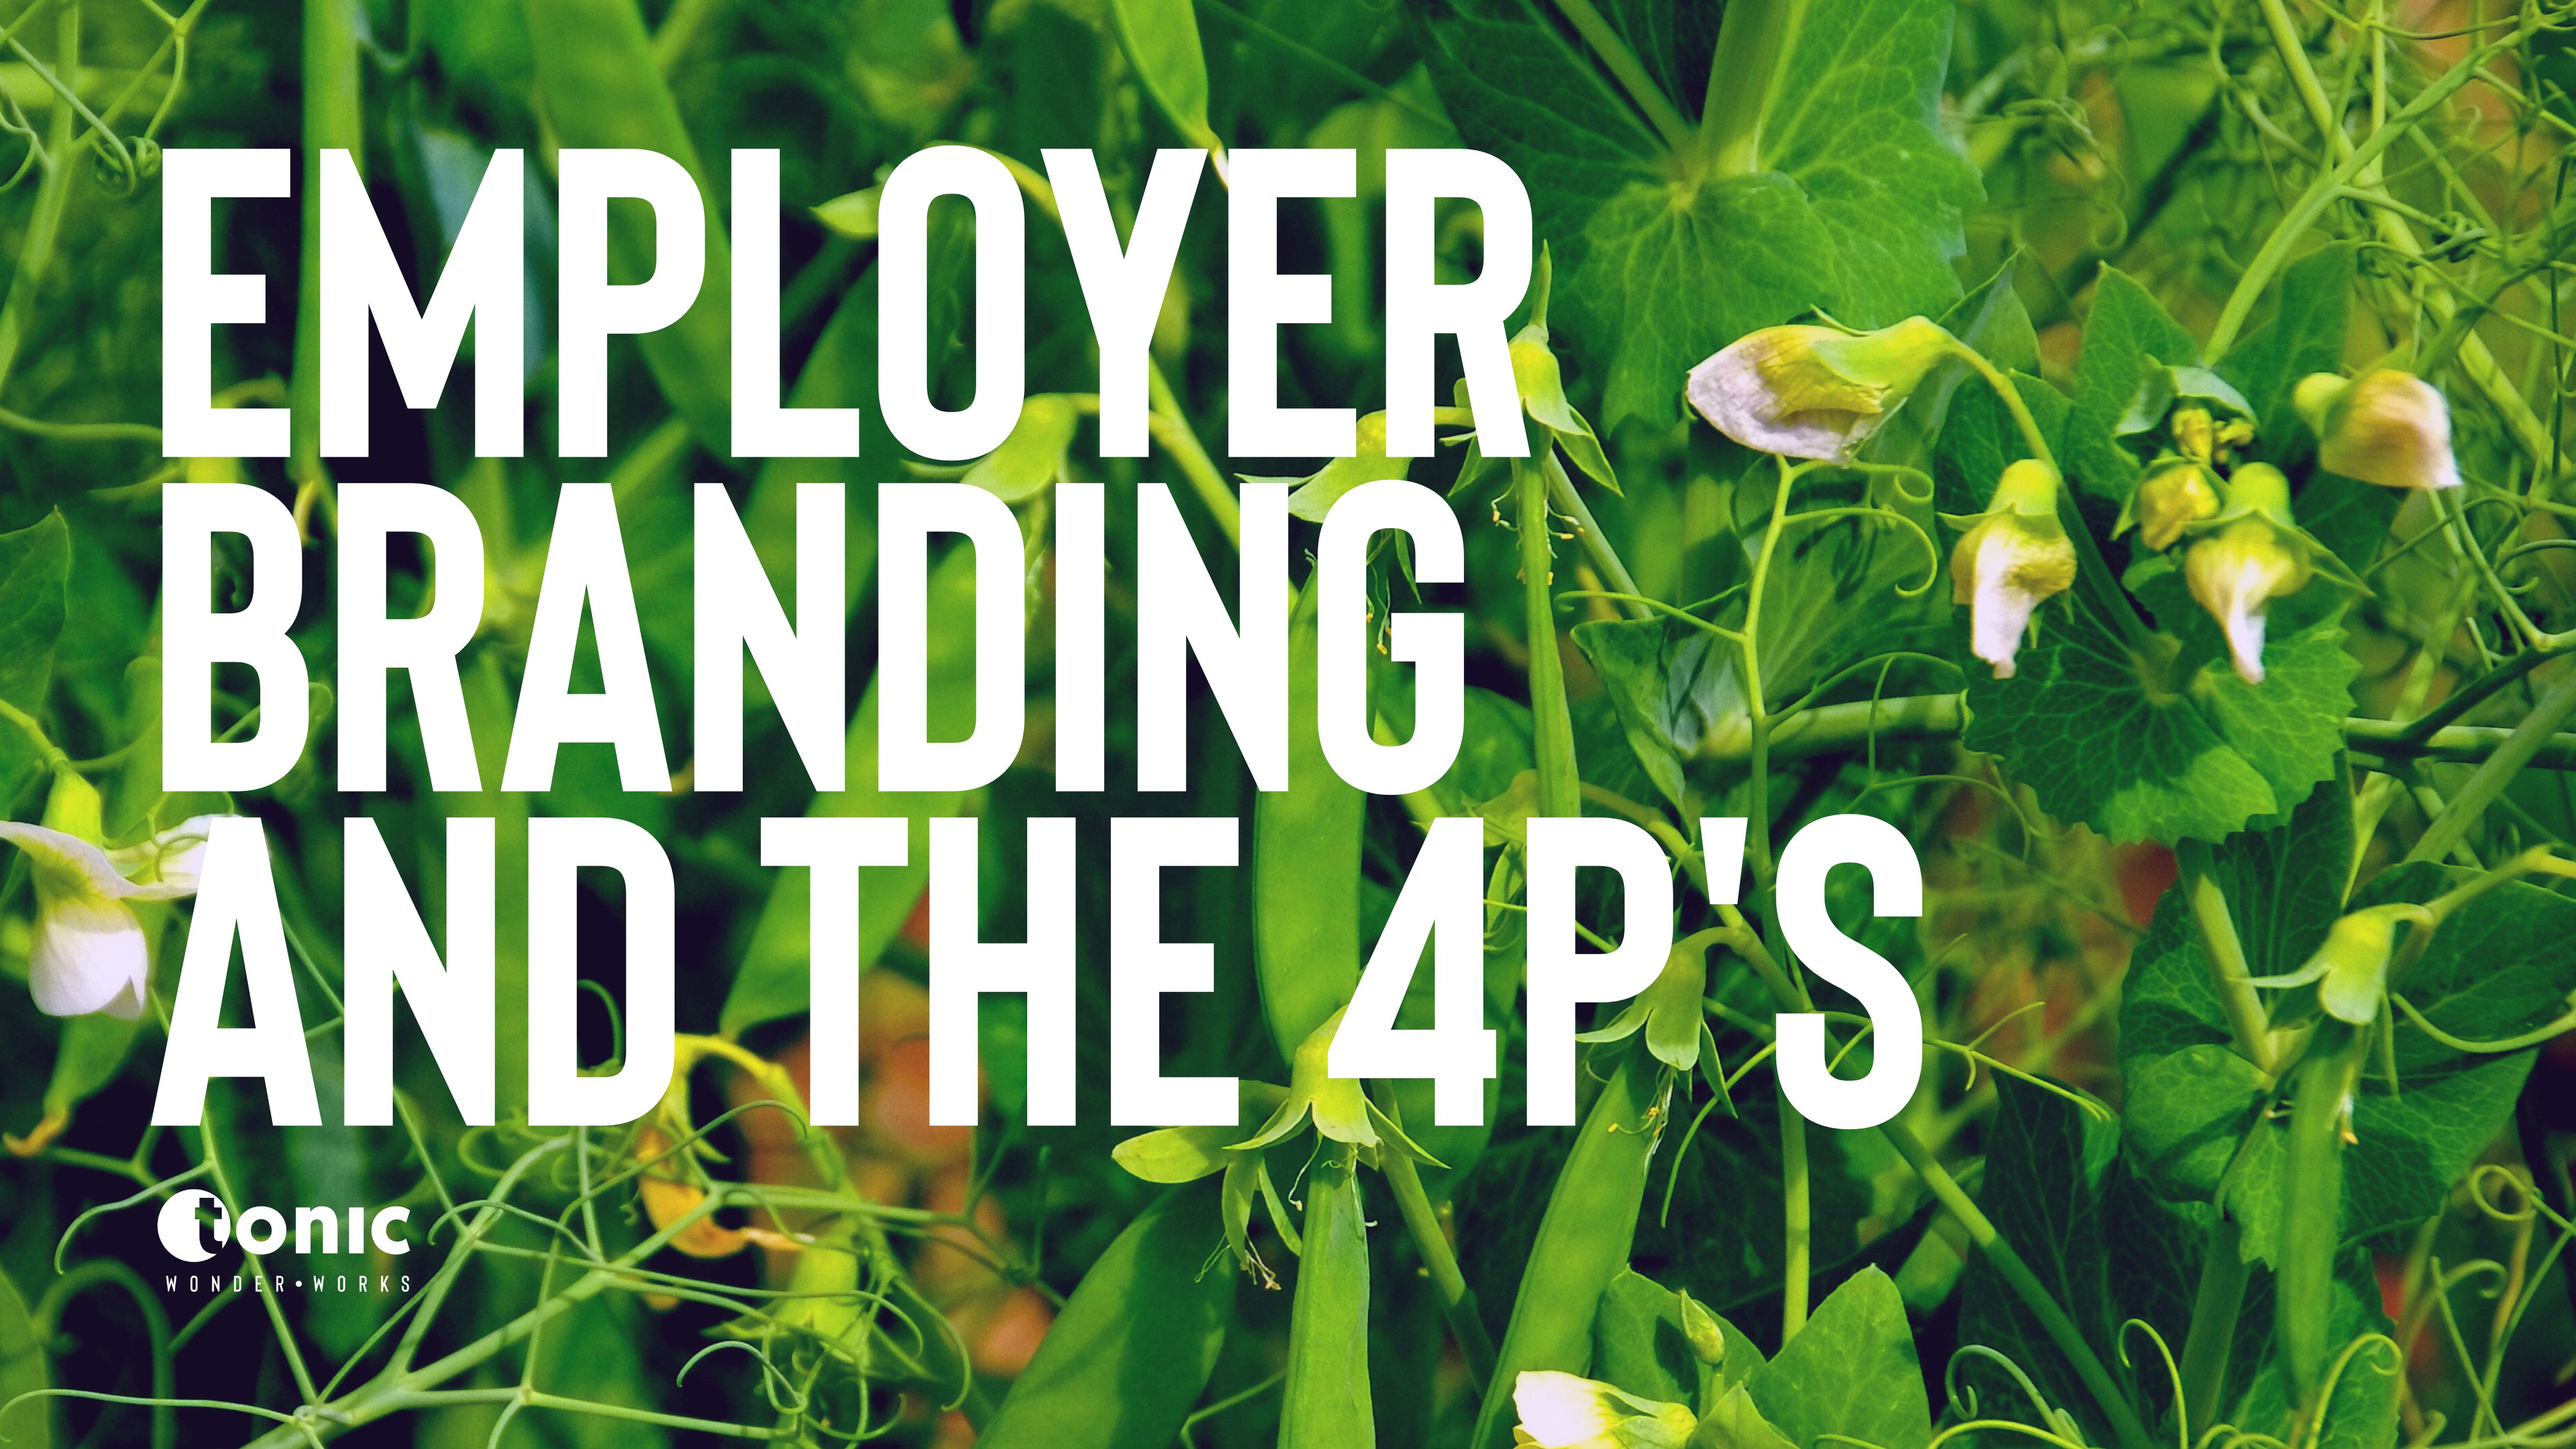 The 4P’s of Employer Branding: A Human-Centric Approach